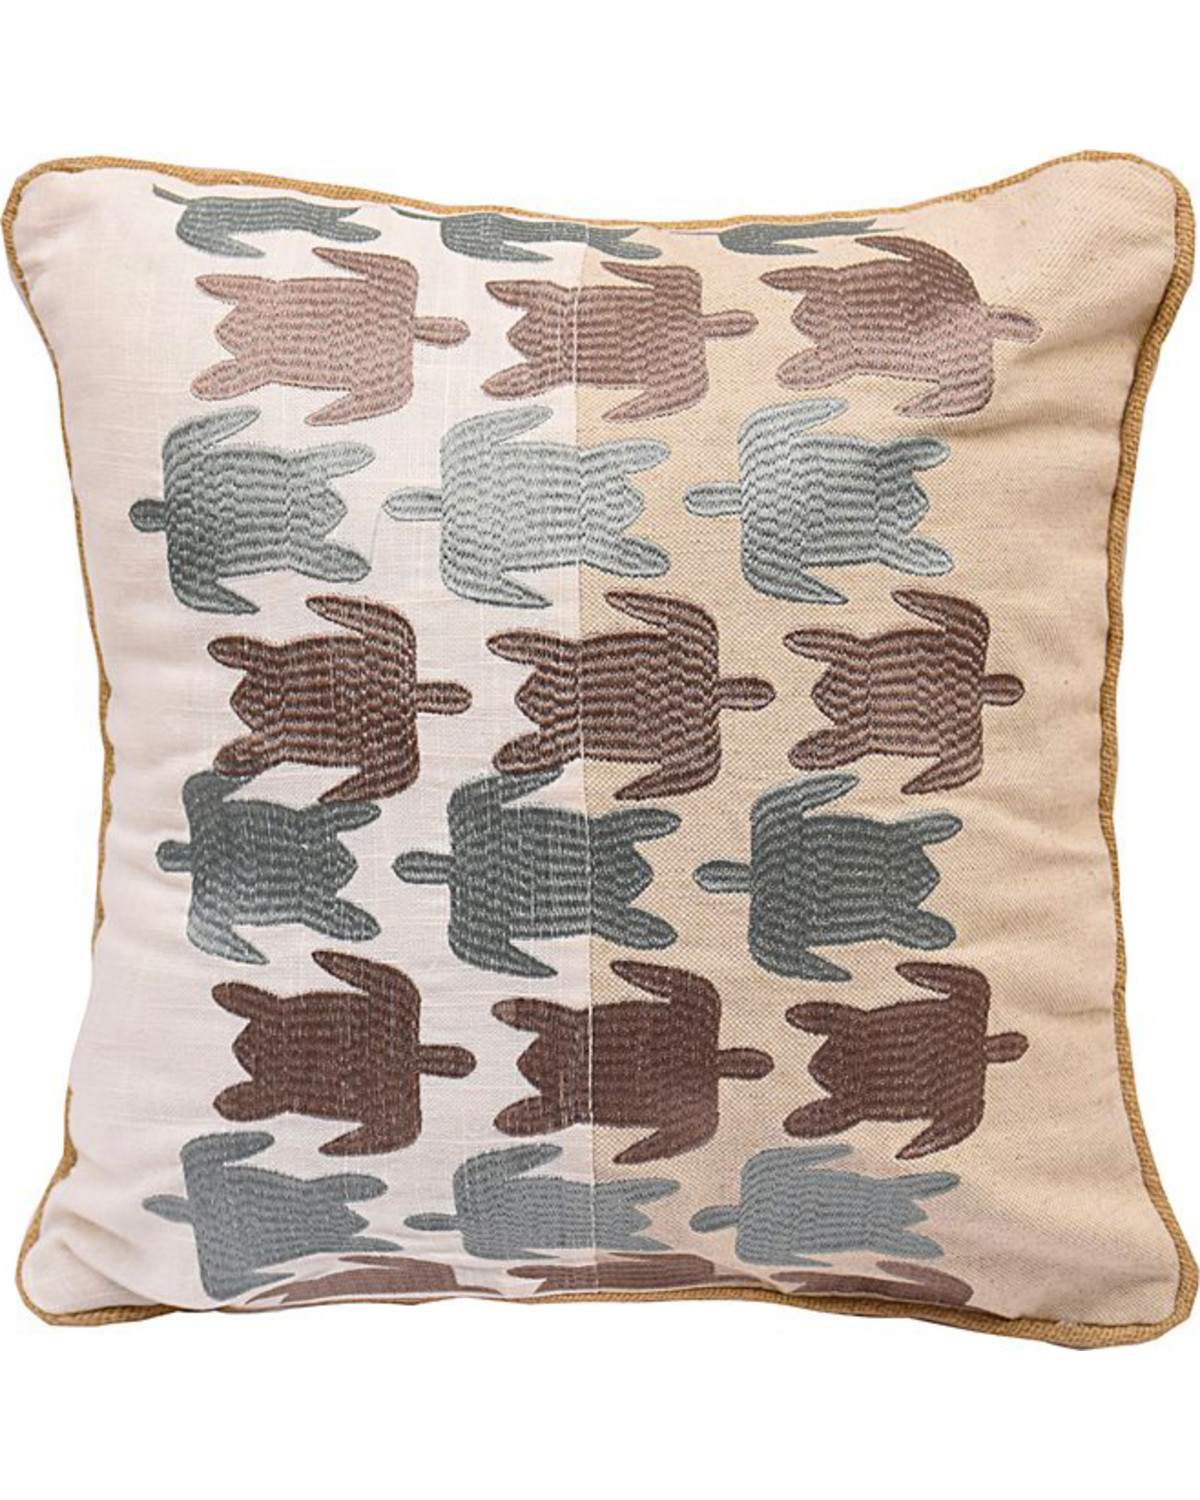 HiEnd Accents Turtle Embroidered Linen Pillow